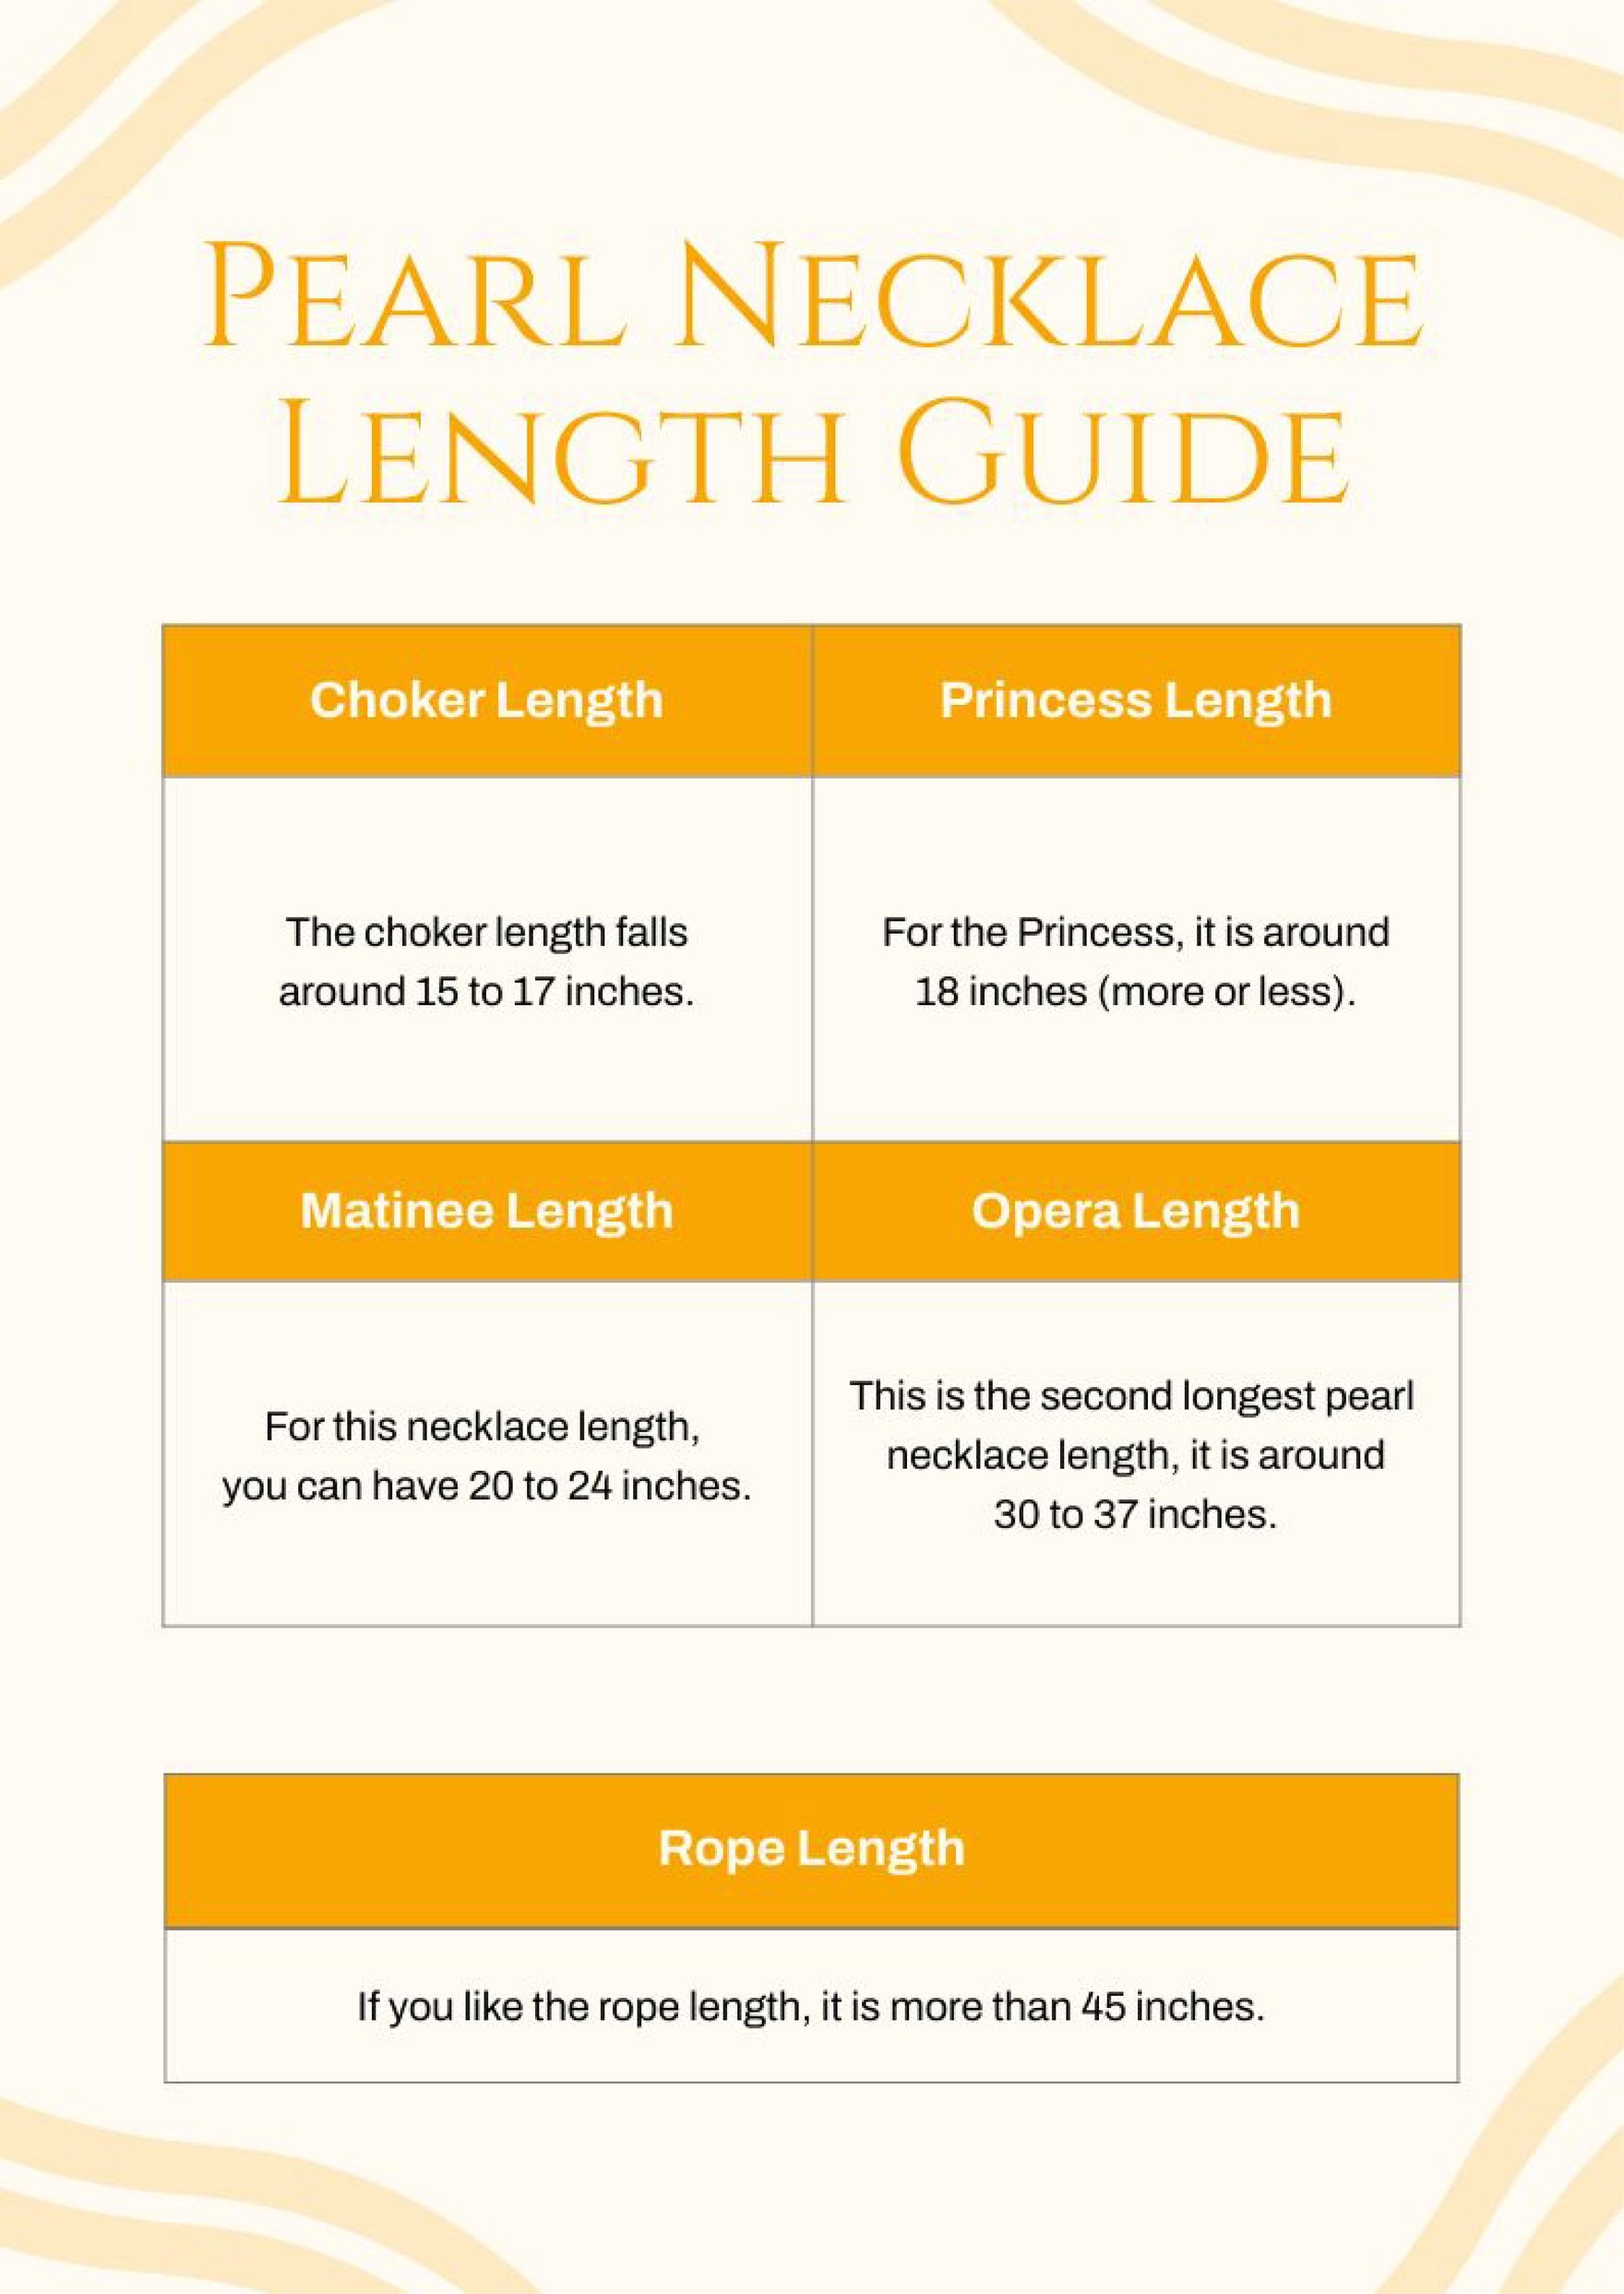 Proper Necklace Length | With Clarity